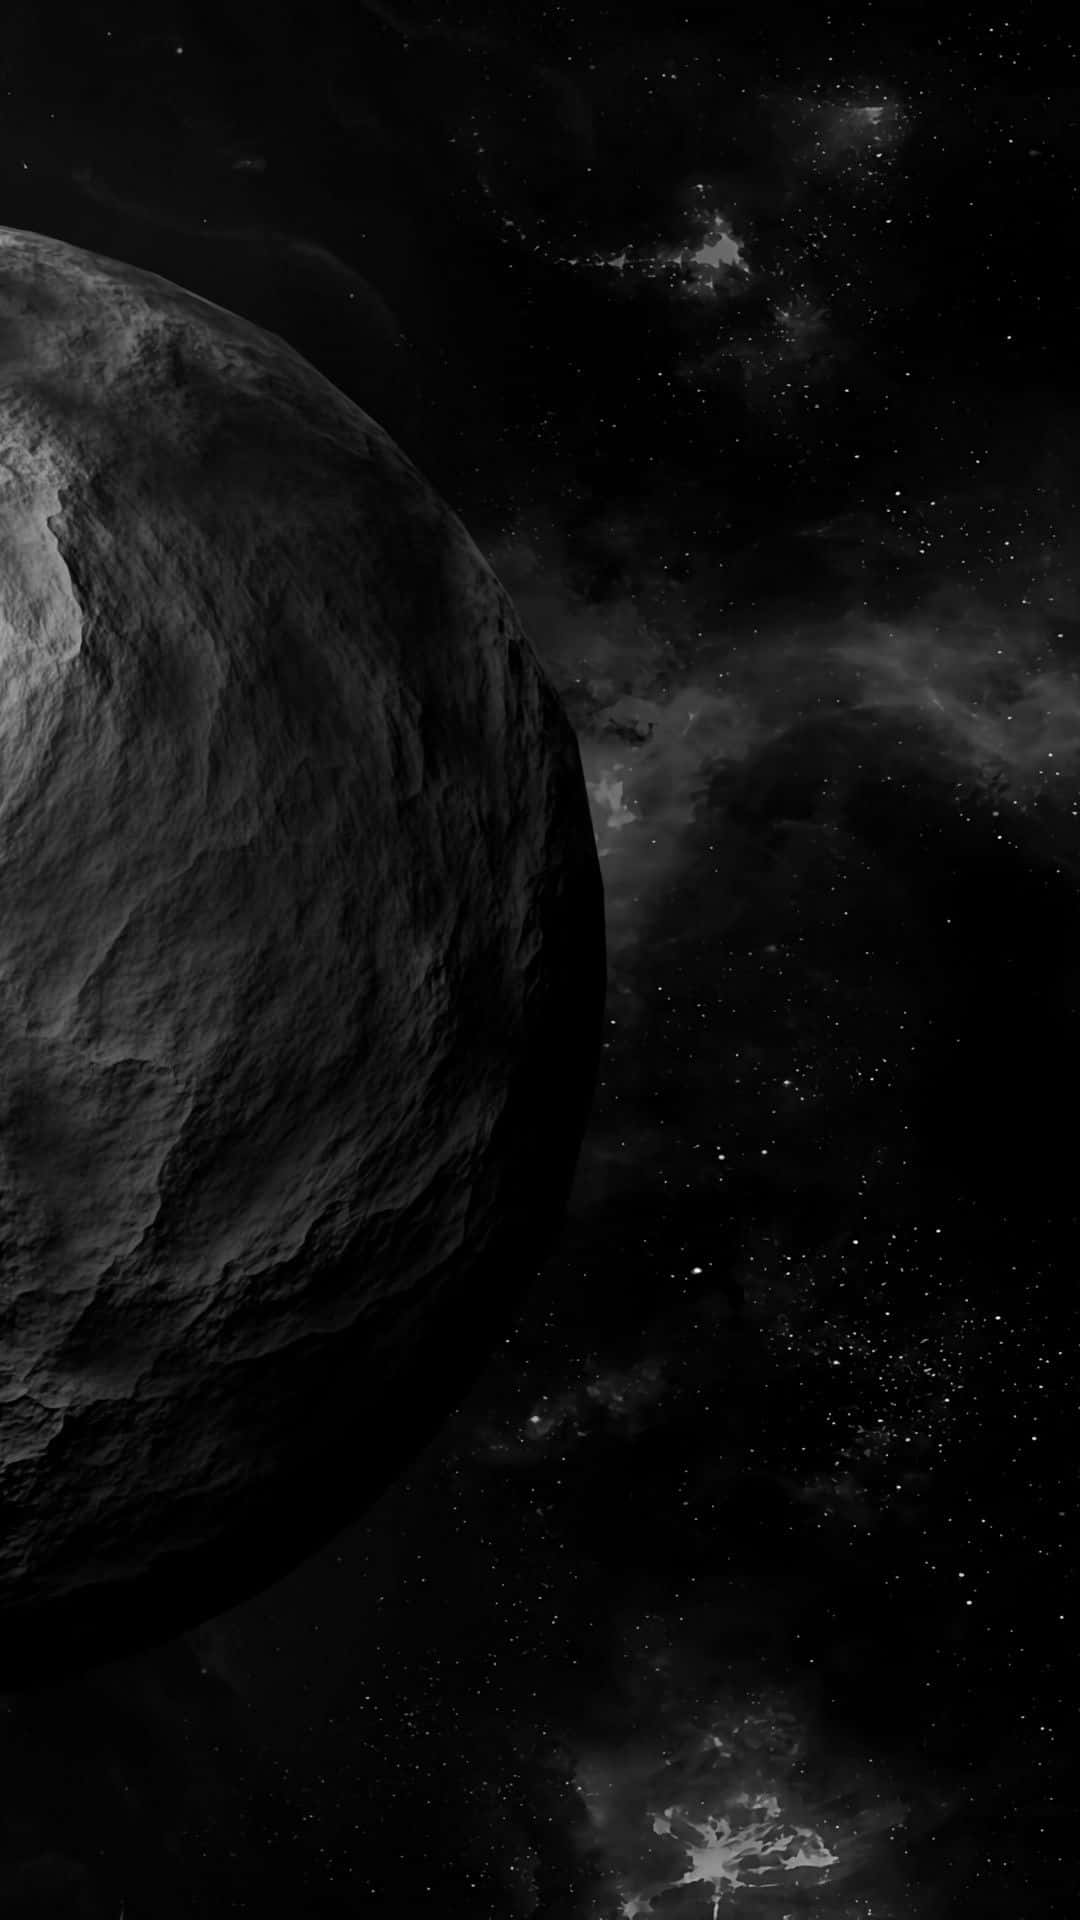 A Black And White Image Of A Large Planet Wallpaper